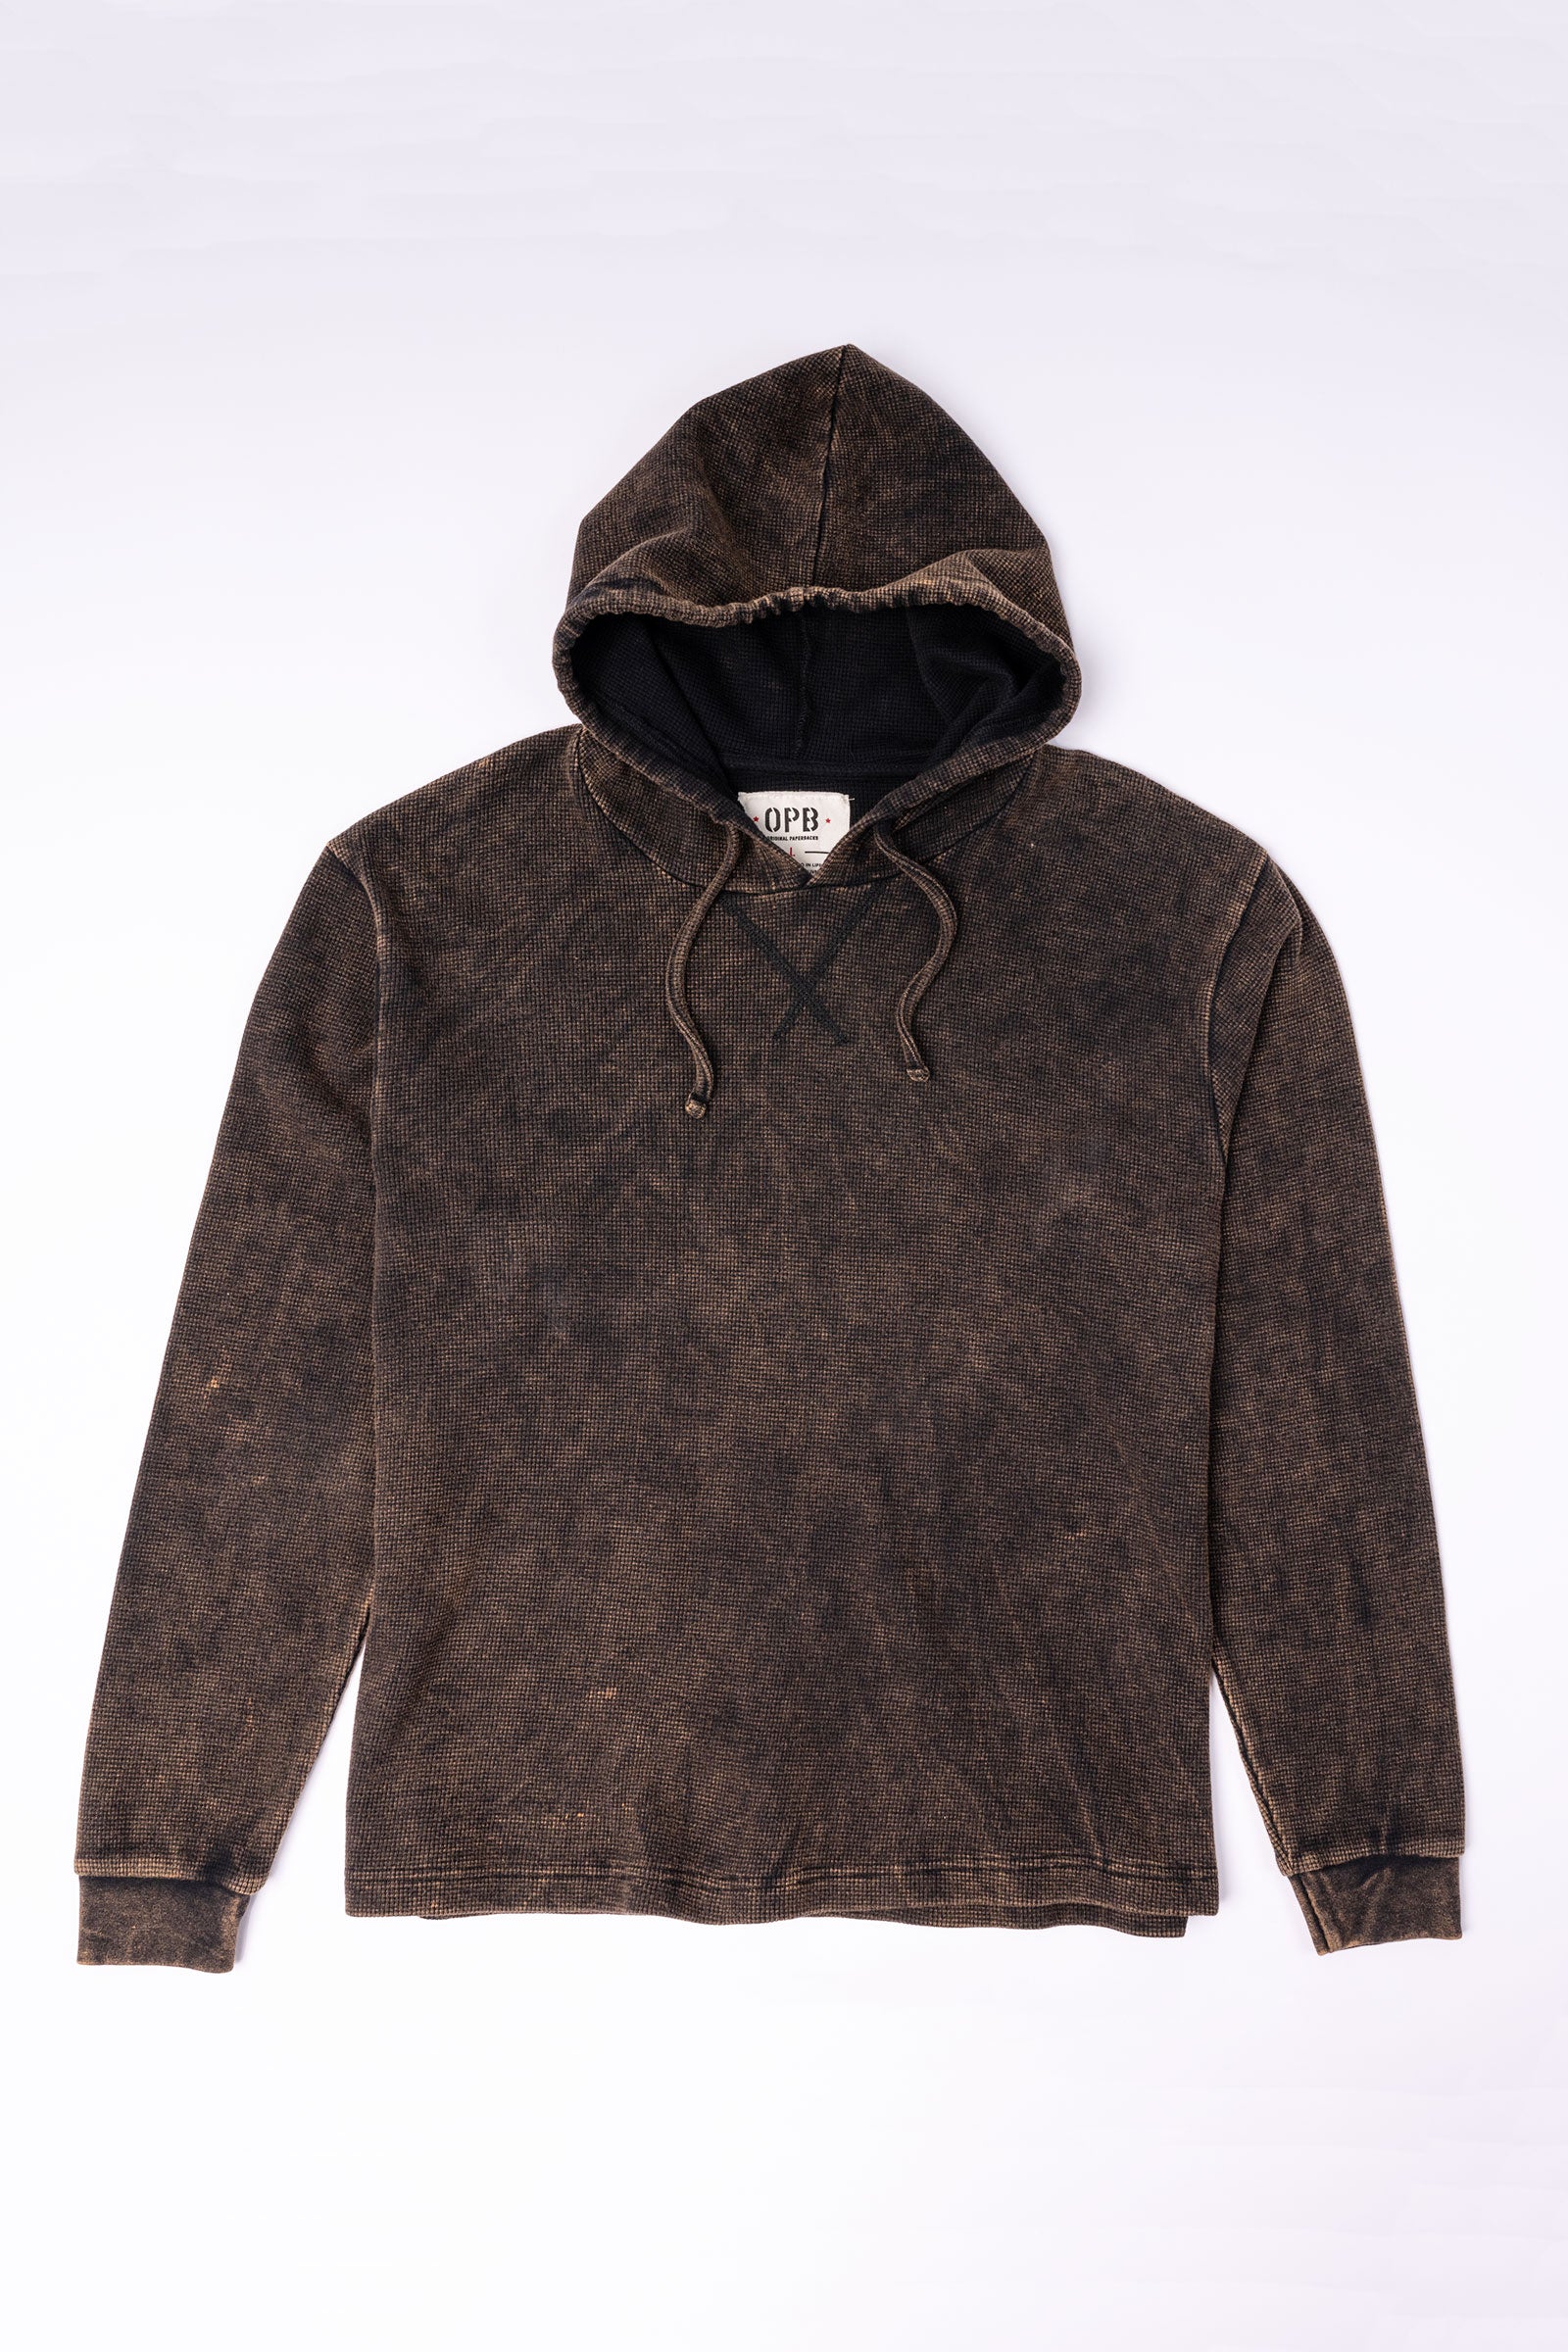 Original Paperbacks Waffle Knit Hoodie in Copper Flat Front